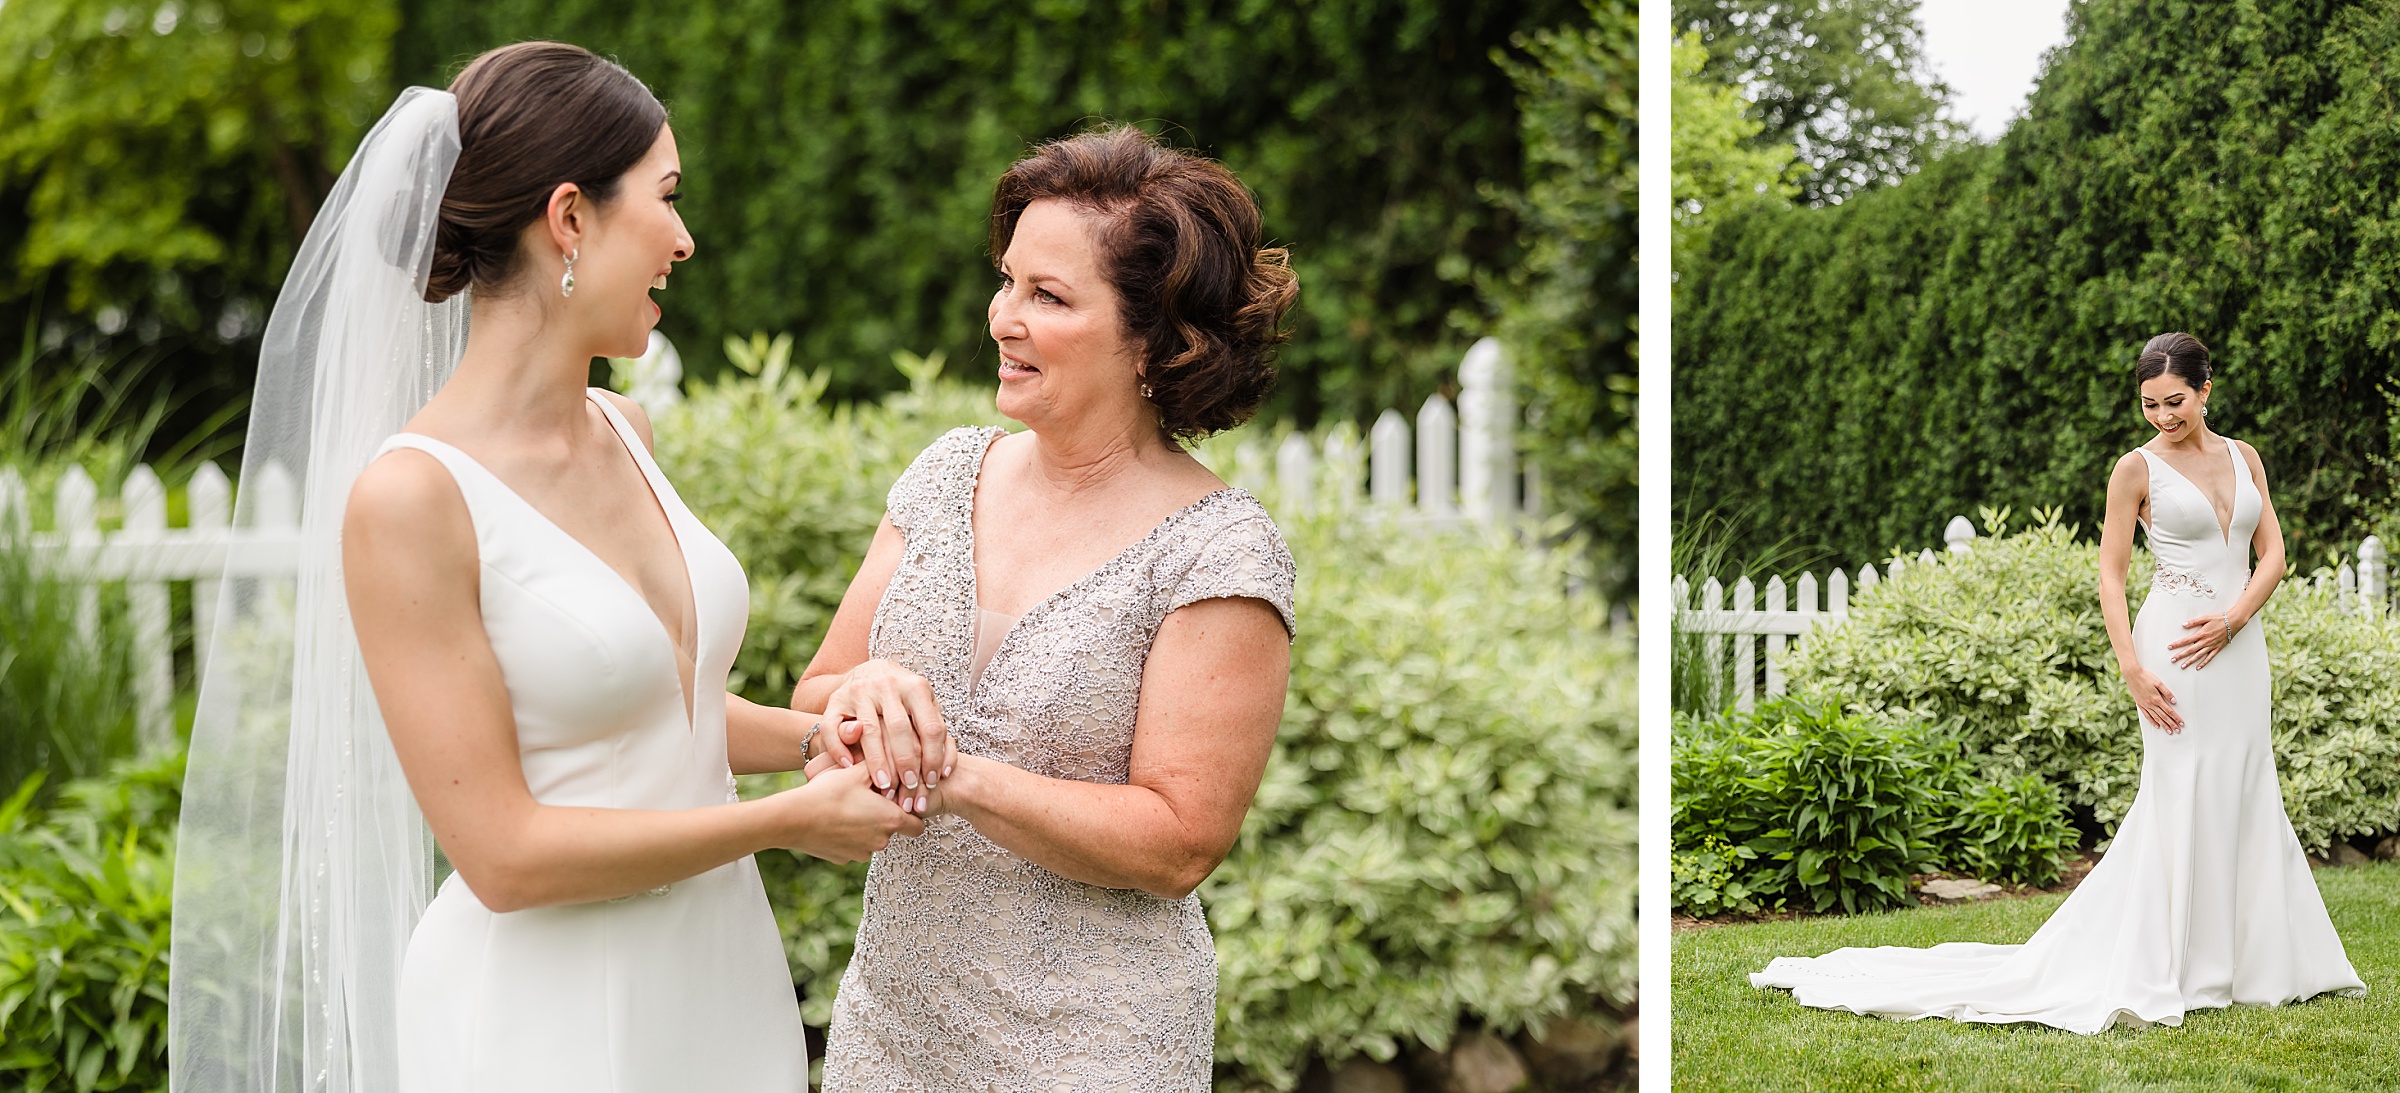 Bride and mother share a special moment before her wedding at the Chevy Chase Country Club in Wheeling, Illinois.